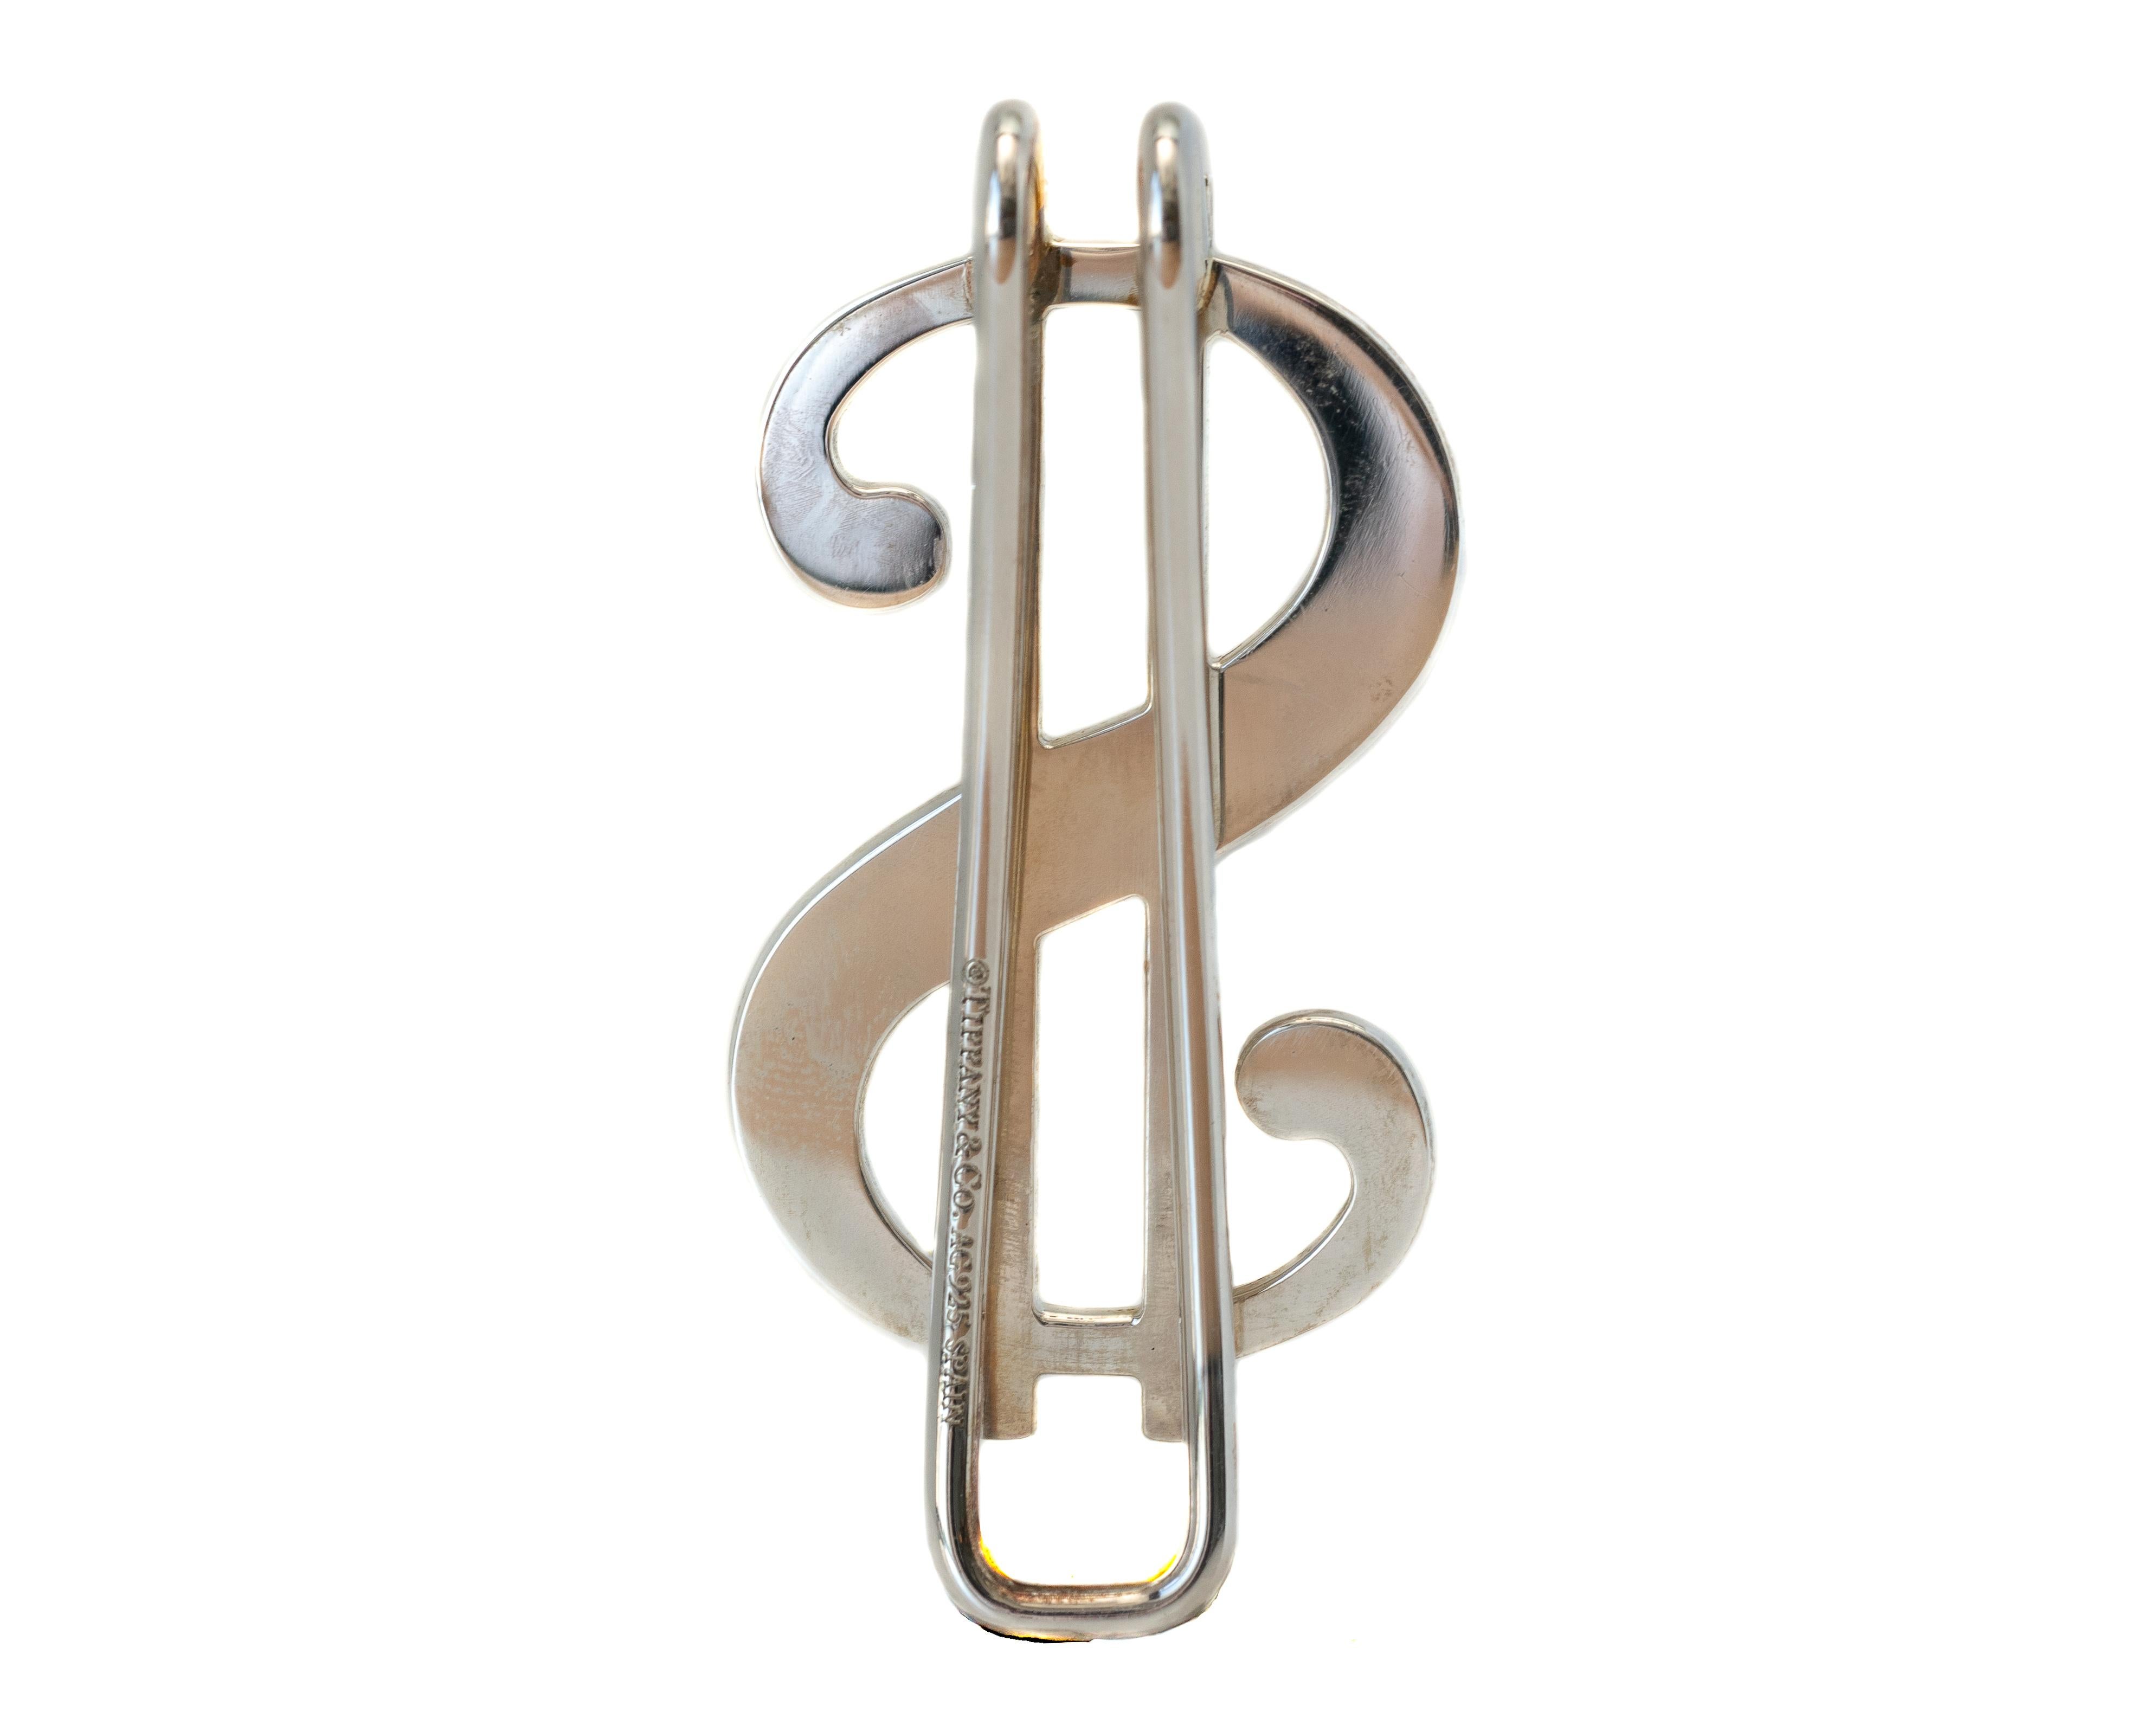 Tiffany & Co. Dollar Sign Money Clip - Sterling Silver

Features:
Polished Sterling Silver
from Tiffany & Co. Spain
Measures approximately 5.25  x 2.5 centimeters
May be Engraved 
Modern, Bold and Sleek Design
Art and Function meet in this Stylish